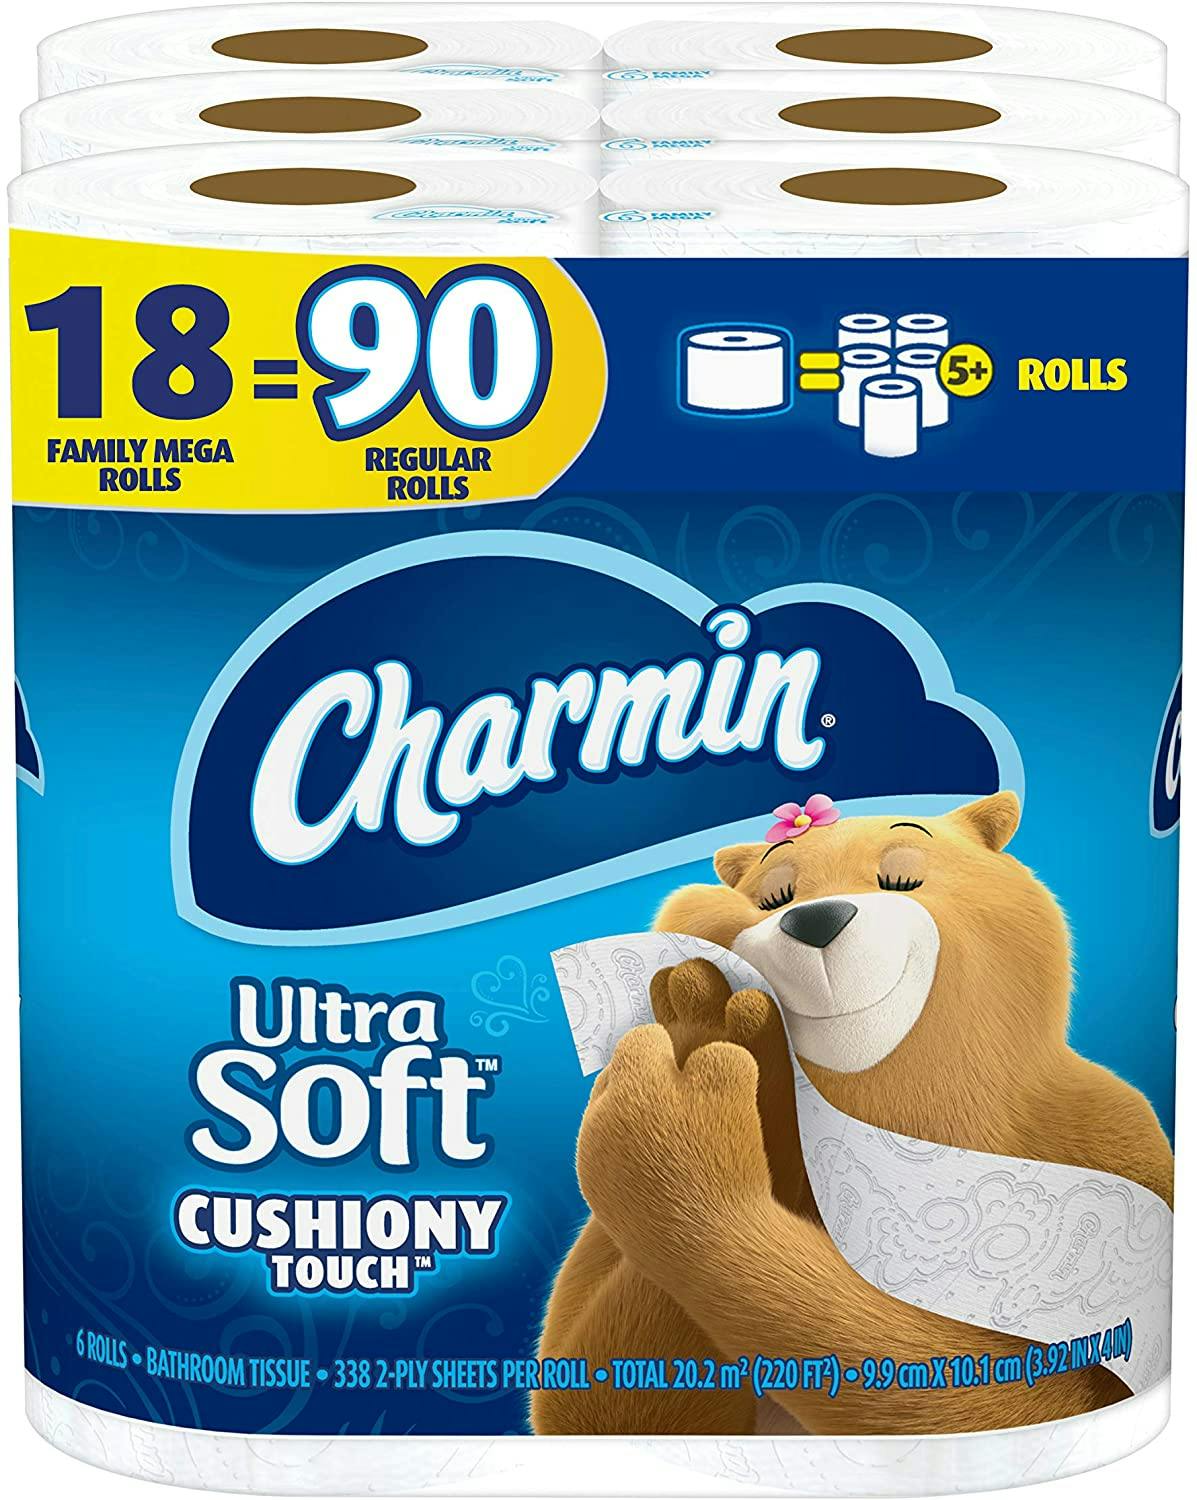 Charmin Ultra Soft Toilet Paper, as Low as $0.19 per Regular Roll on